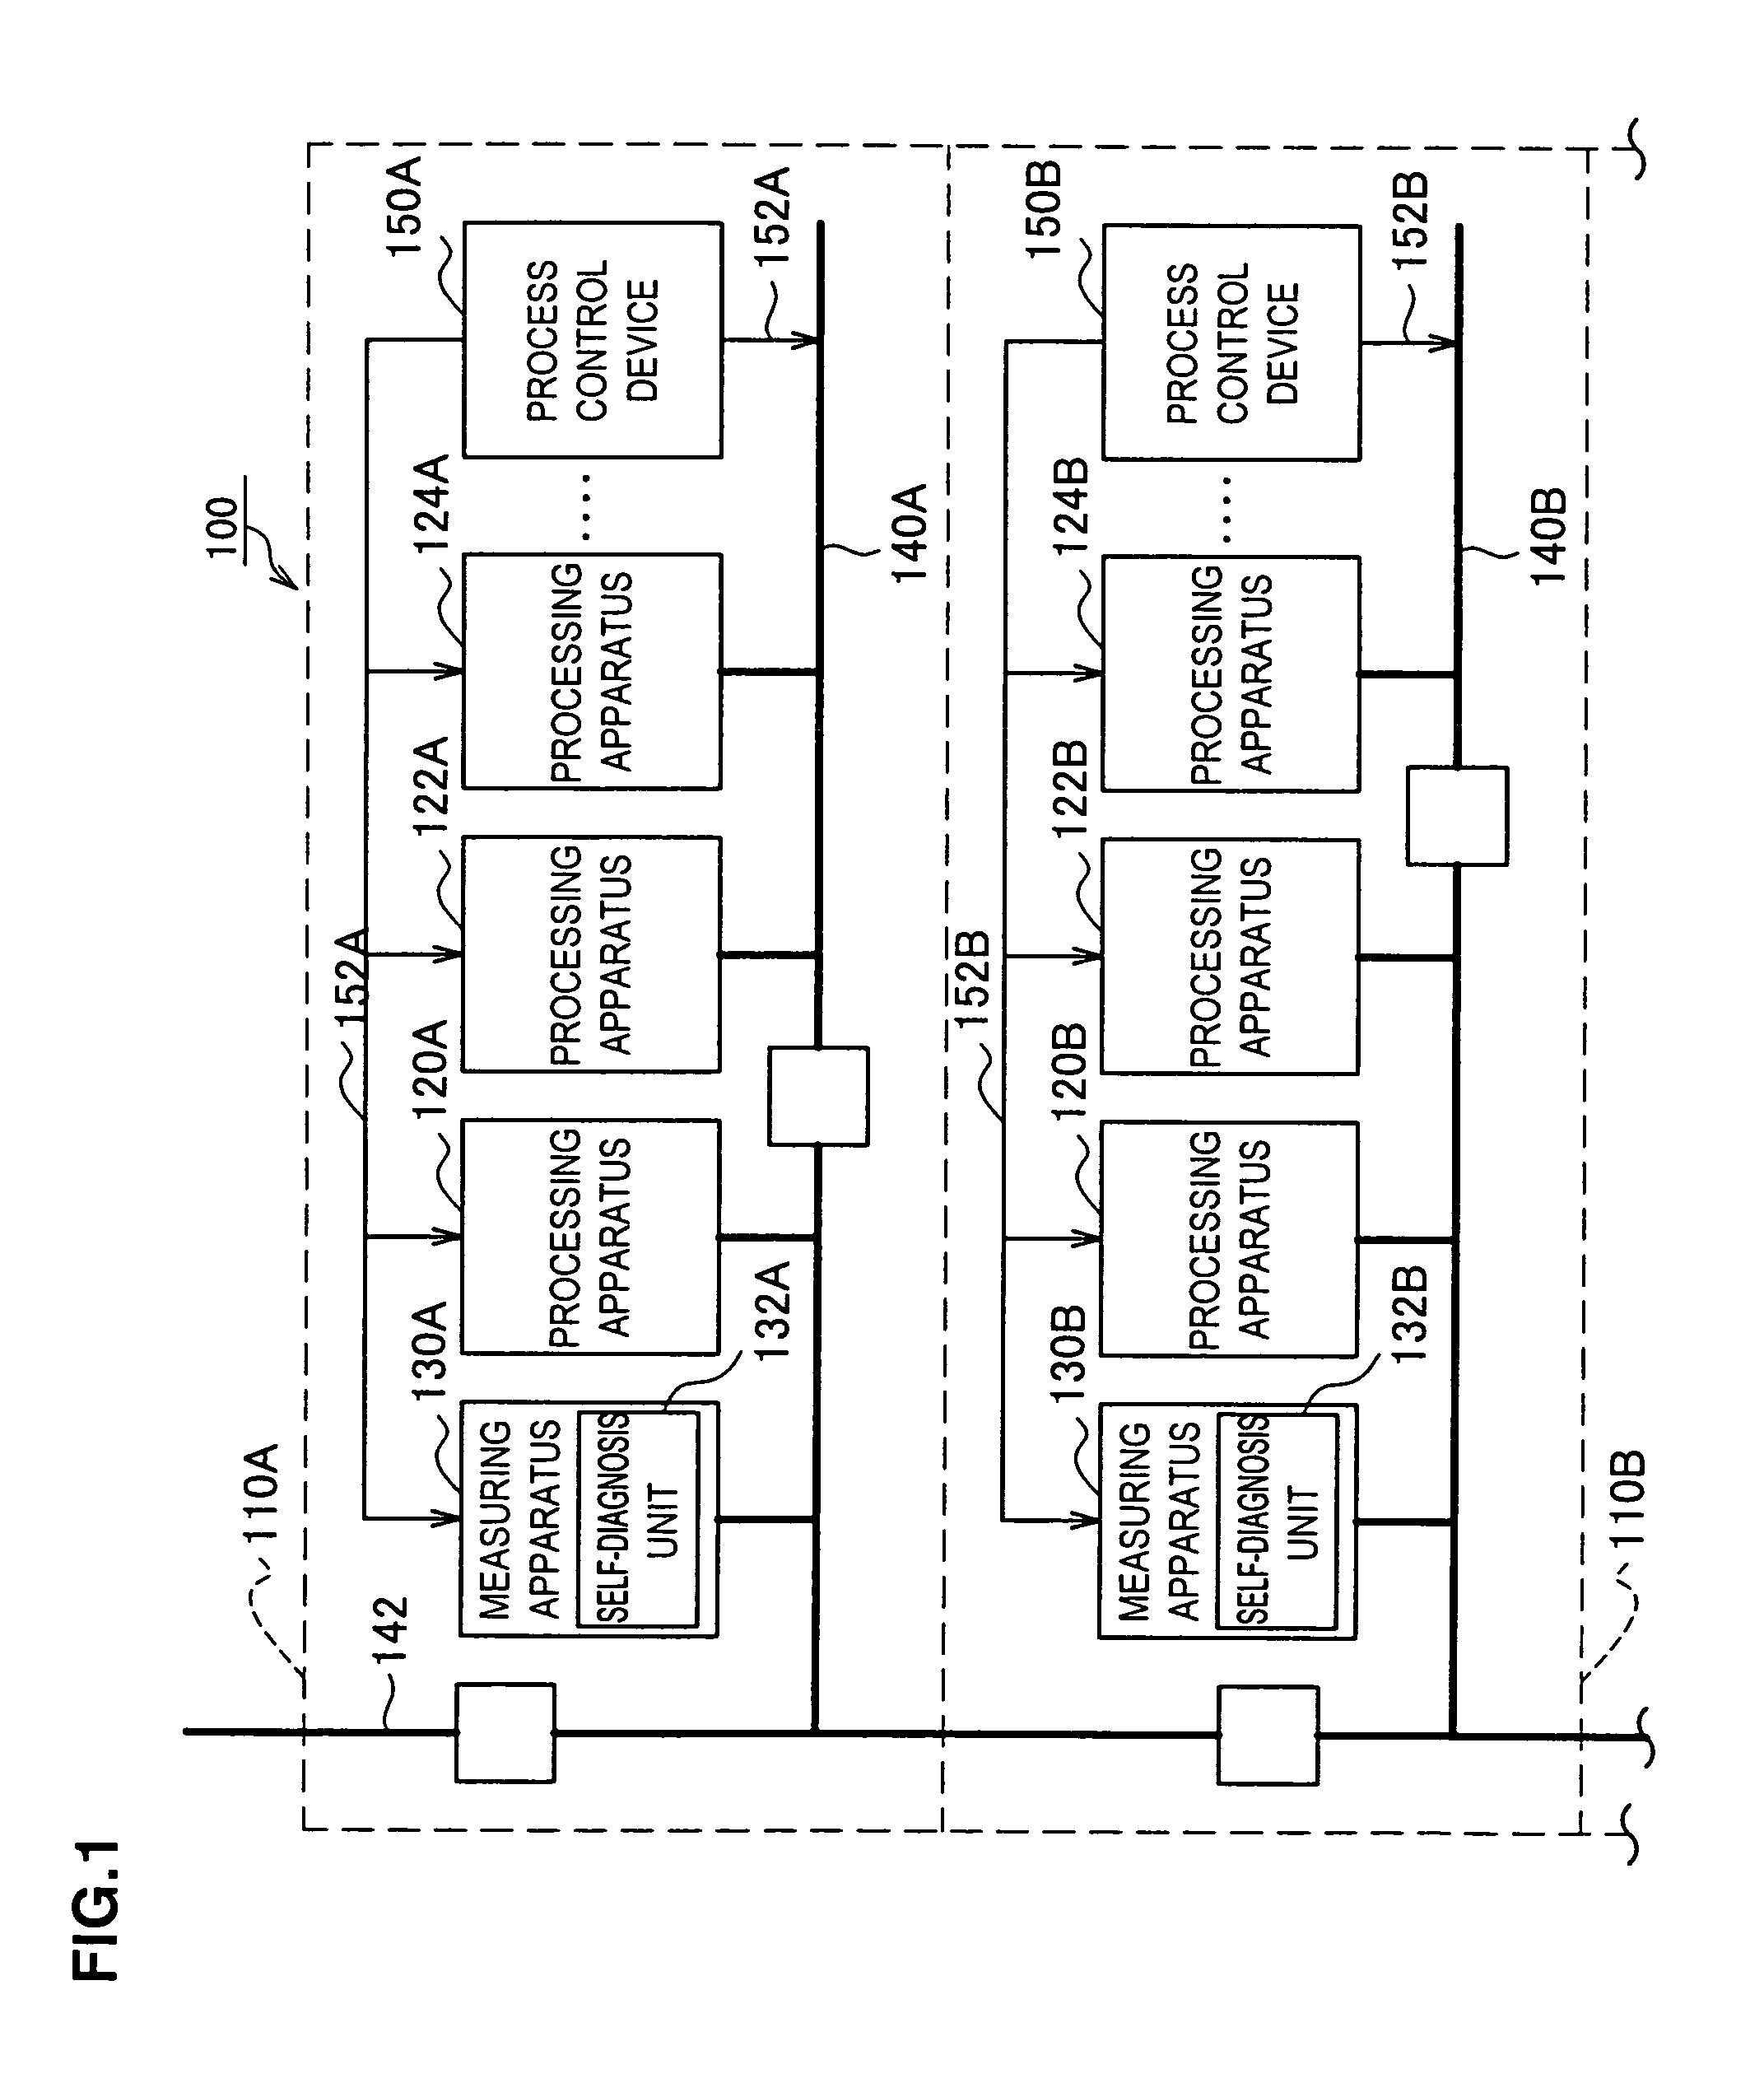 Process control system and process control method